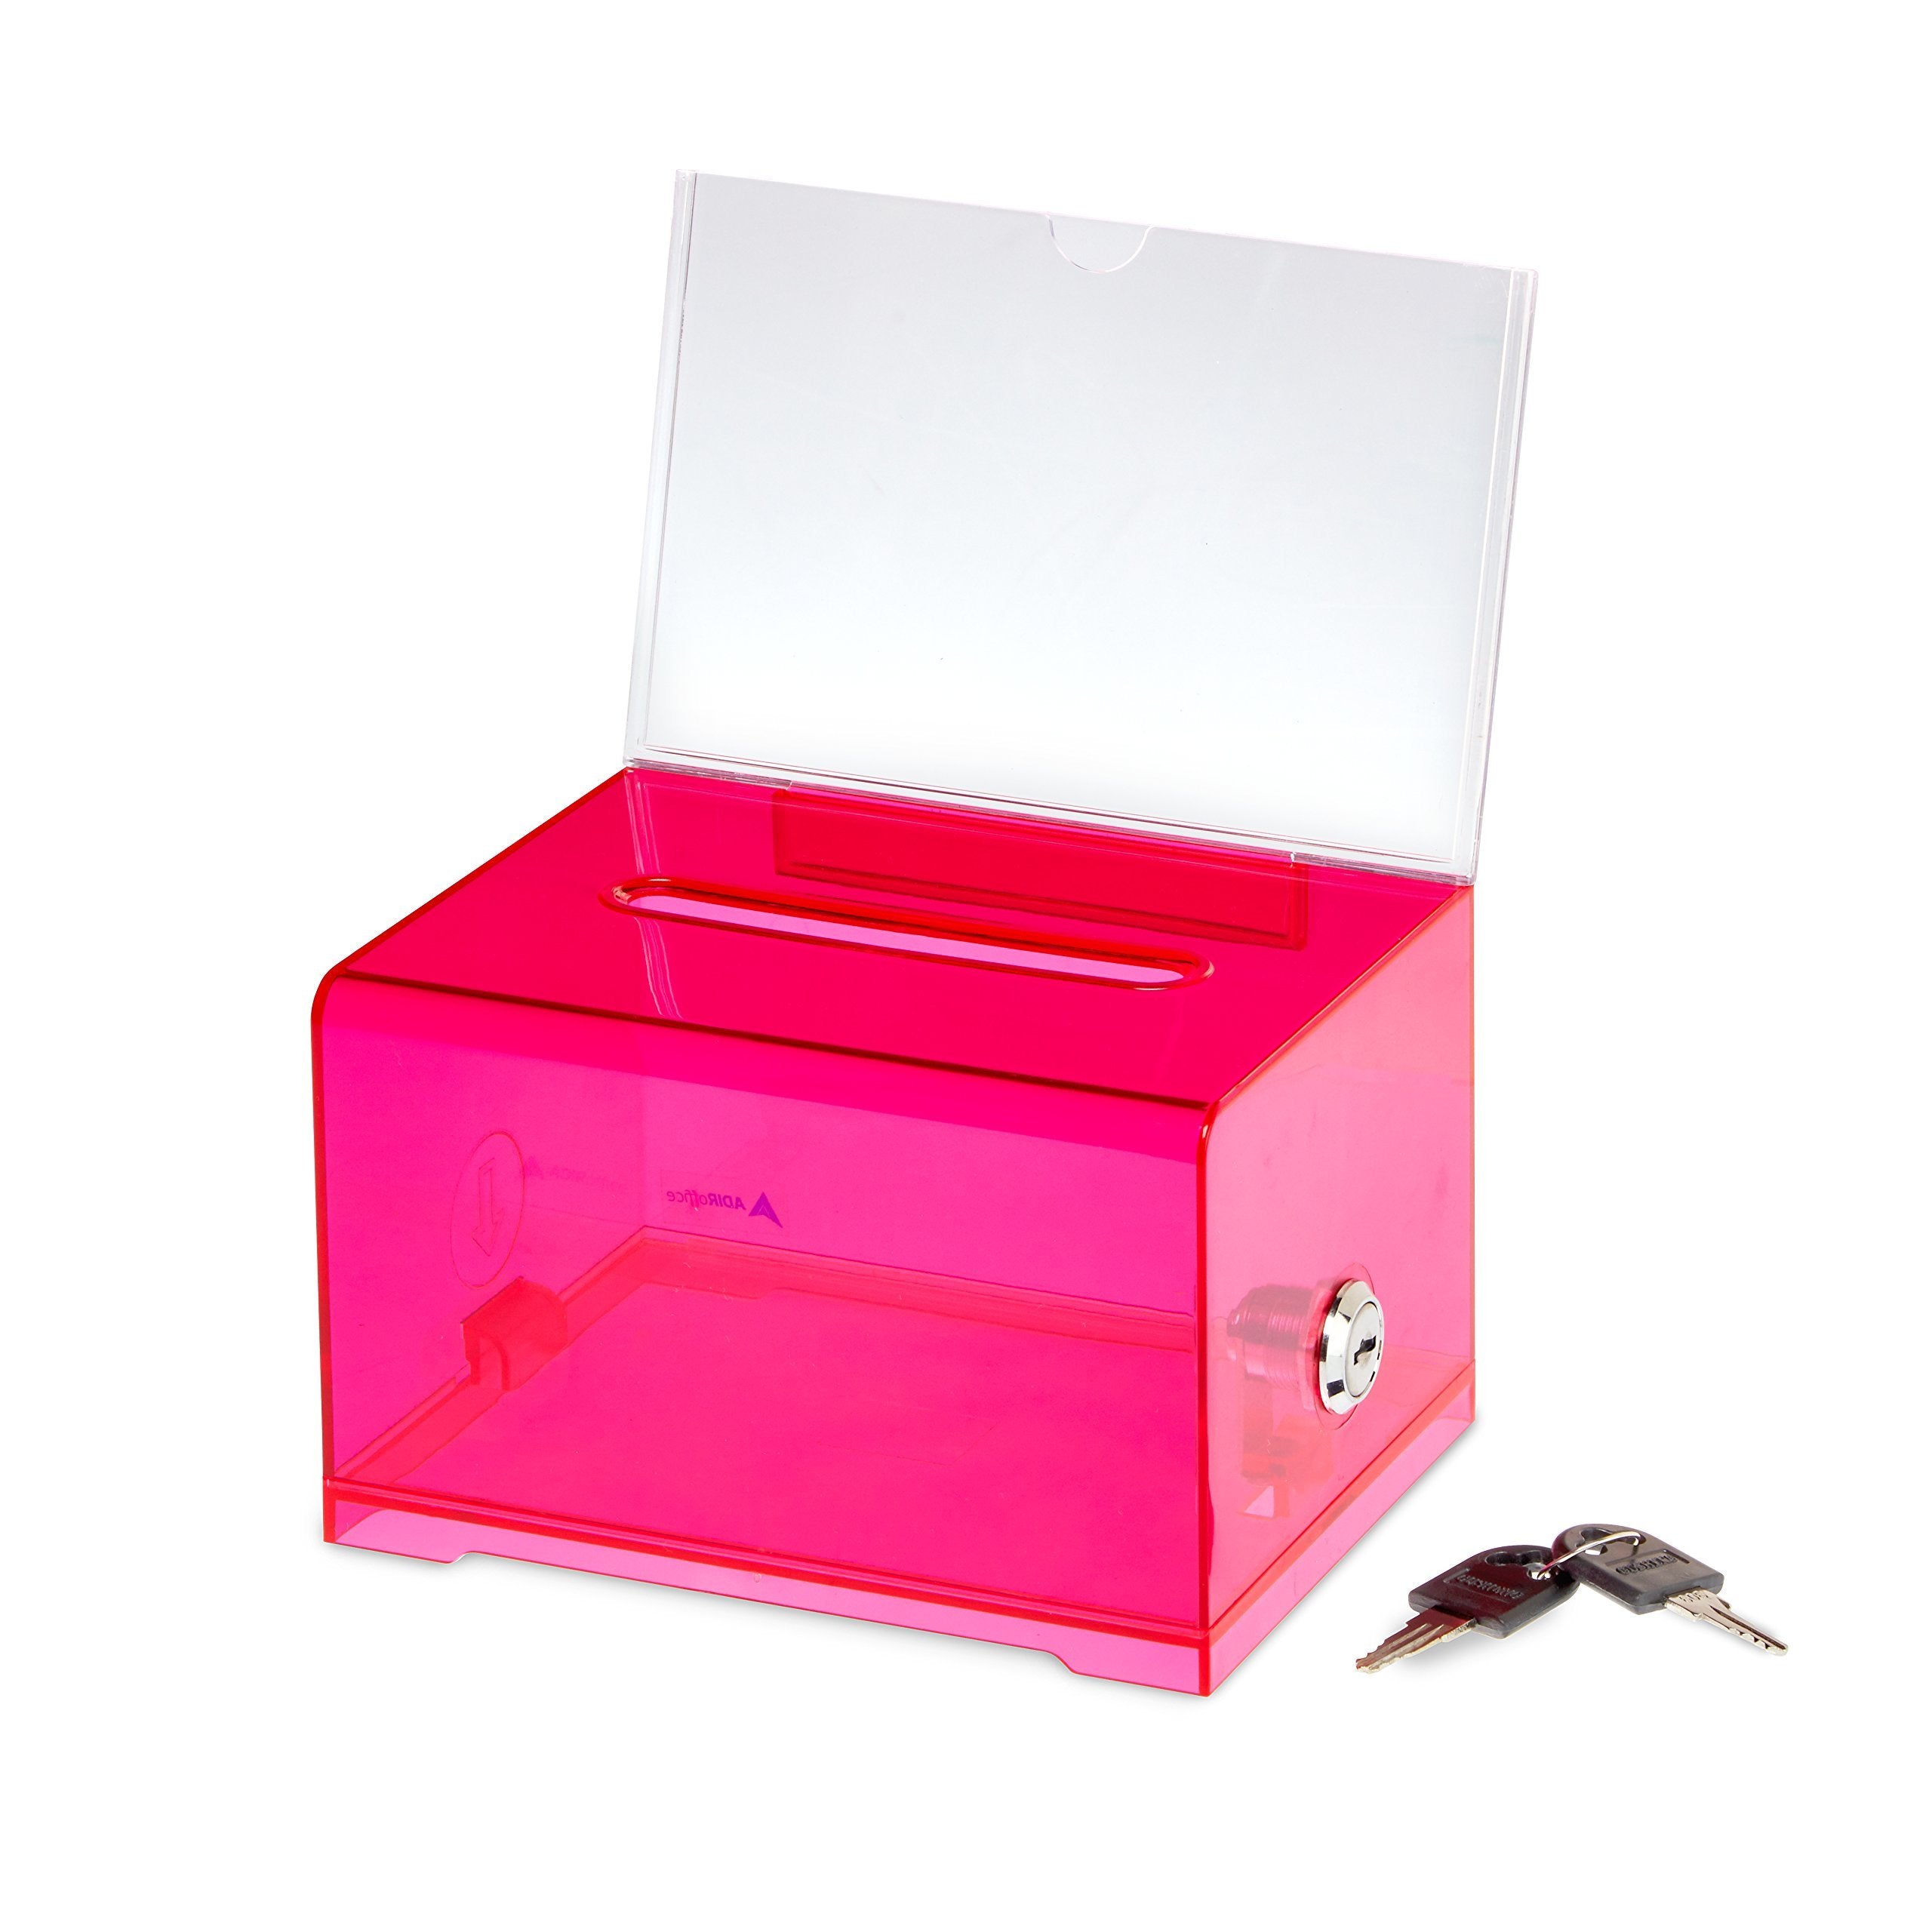 Adir Acrylic Donation Ballot Box with Lock - Secure and Safe Clear Slotted Suggestion Box - Key Storage Lock Deposit Box for Cards, Votes, Tickets, Feedbacks and Money (6.25" x 4.5" x 4")